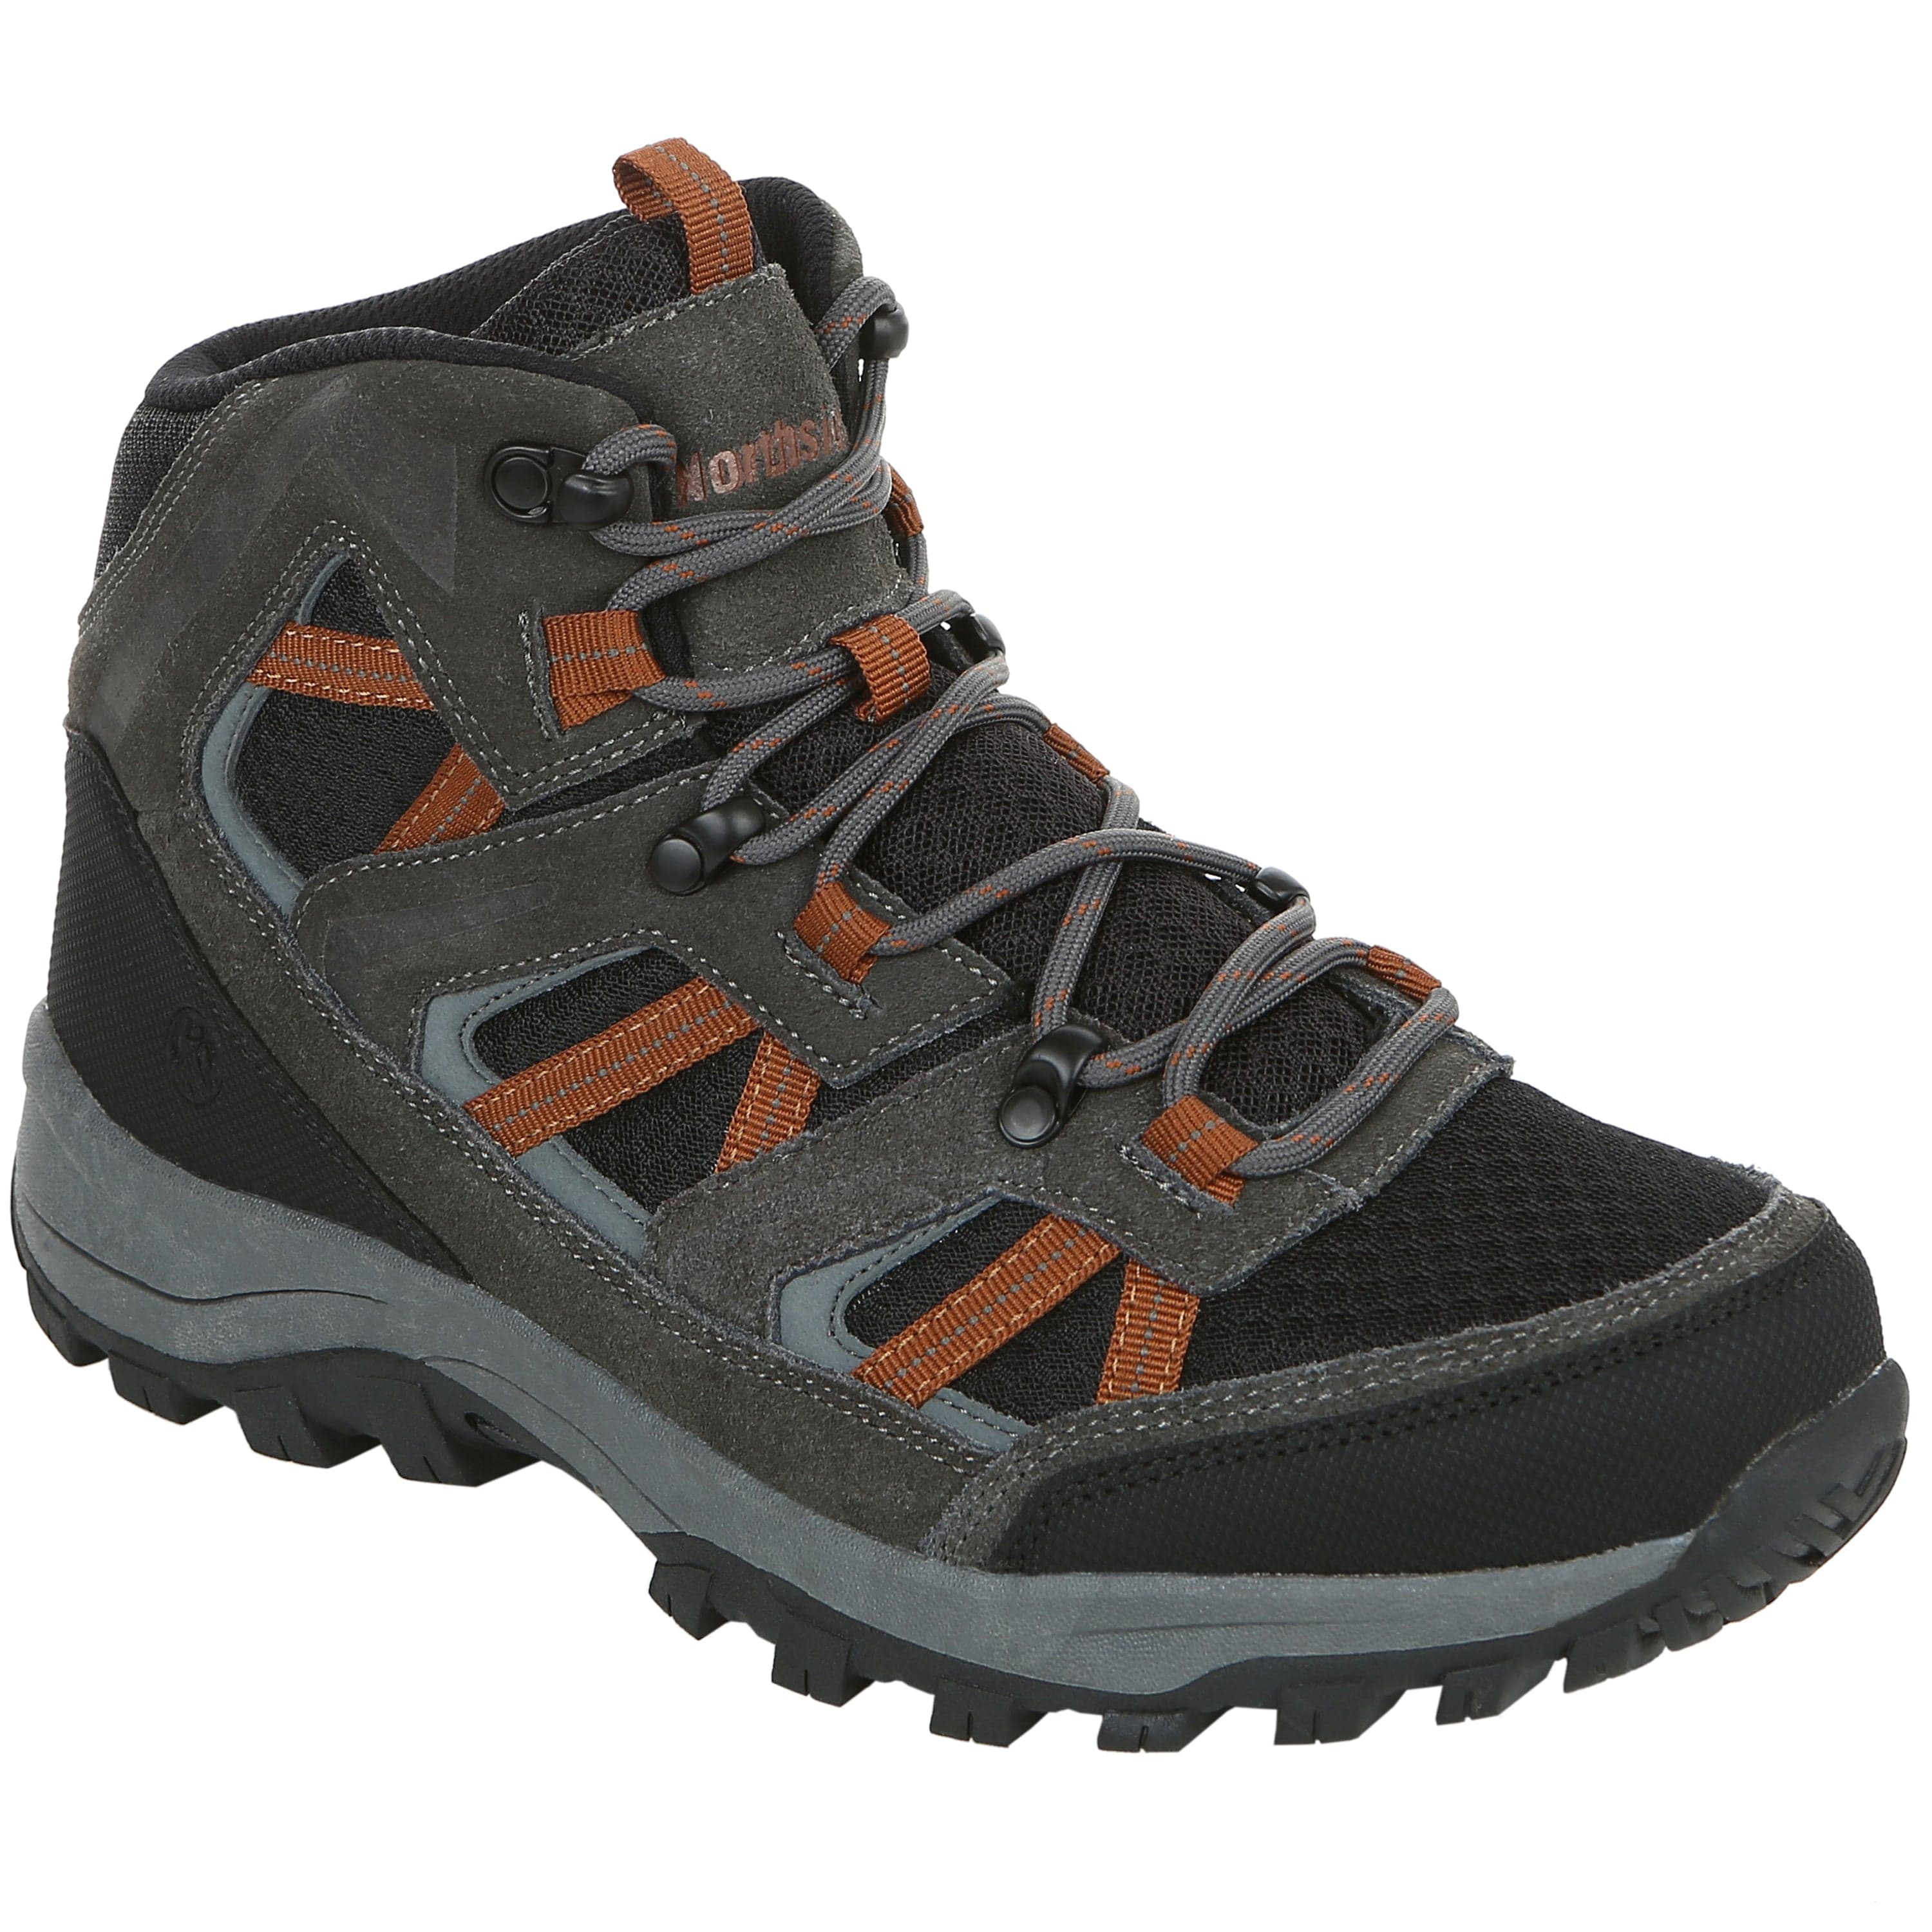 Men's Arlow Canyon Mid Hiking Boot - Northside USA